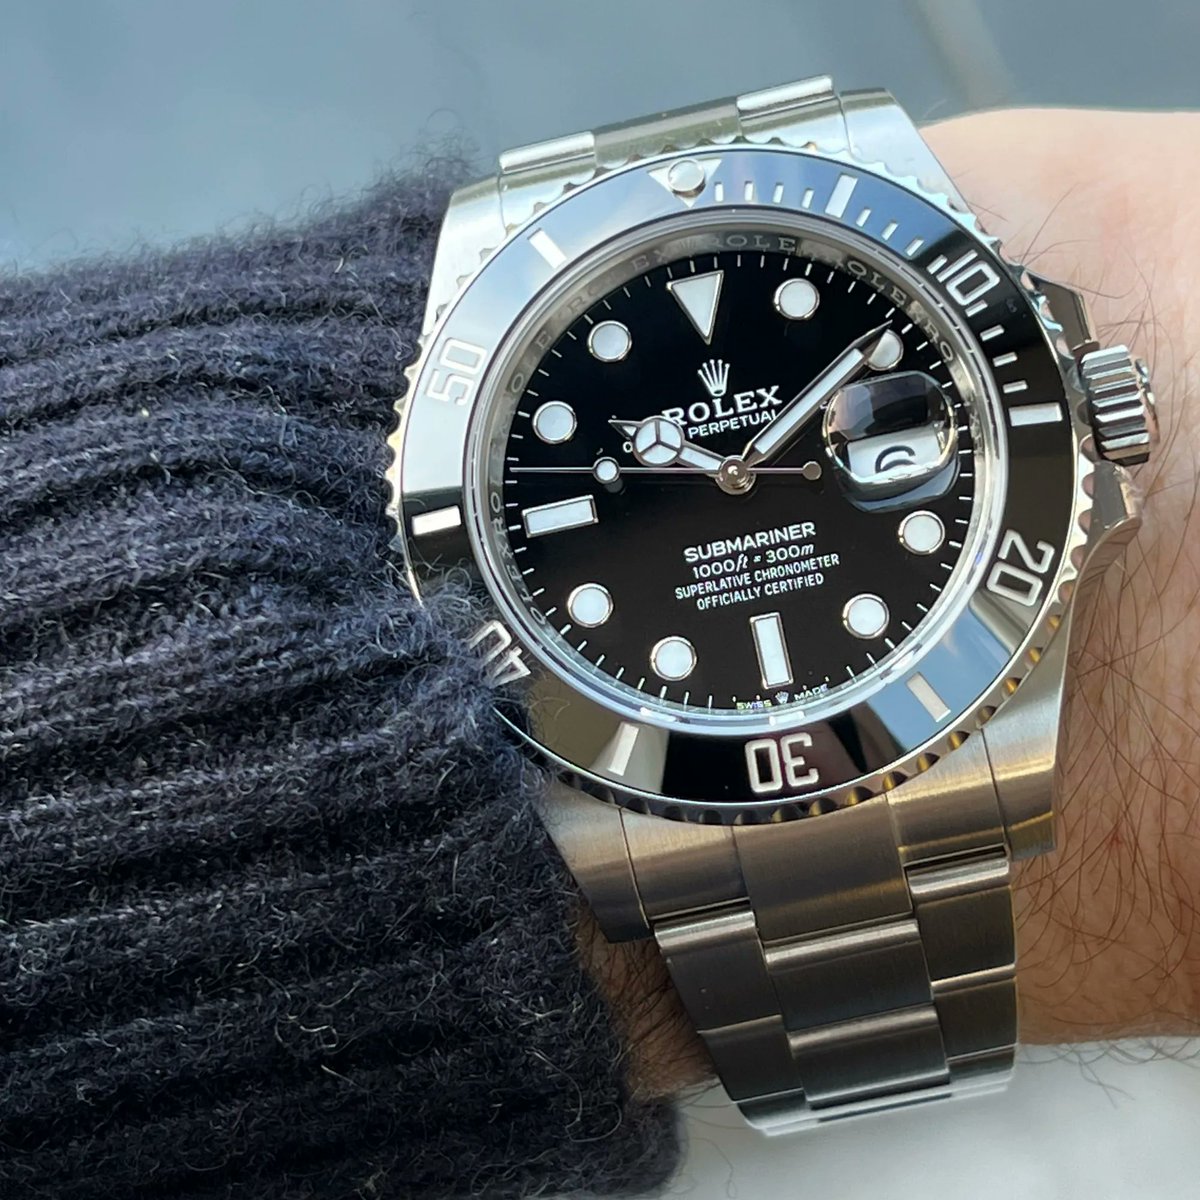 Elegant. Sporty. Classy. The Rolex submariner date 41 mm steel divers watch is the perfect addition to any collection. #rolex #submariner #diverswatch #womw #rolex126610LN #beaugems #beaugemsjewellers